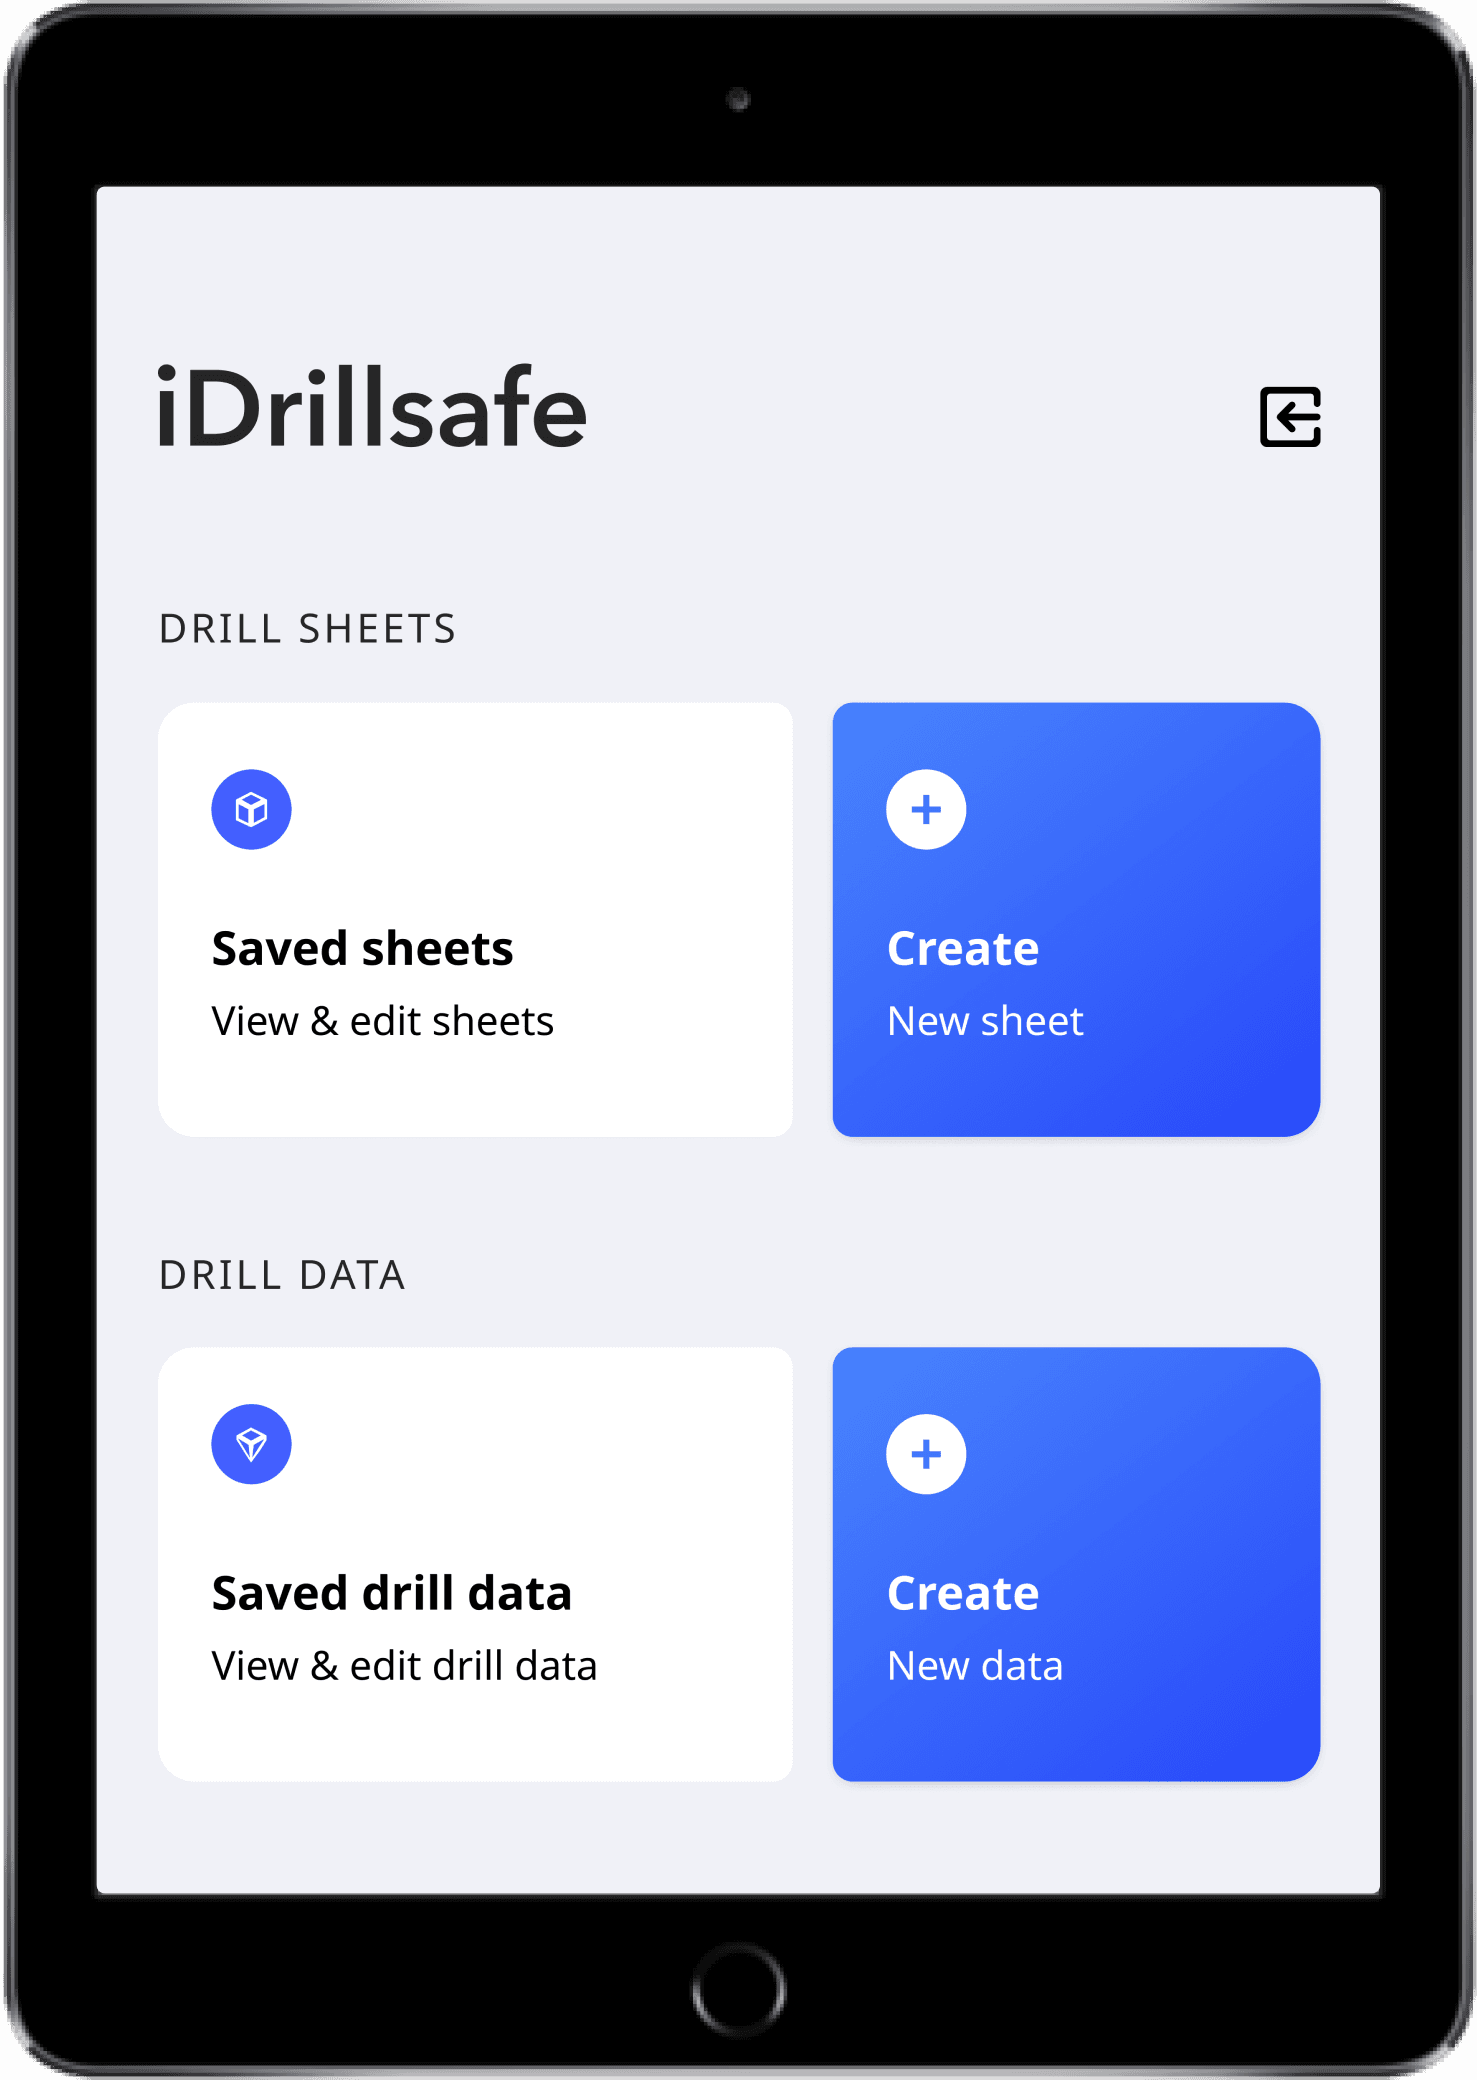 iDrillsafe tablet app features